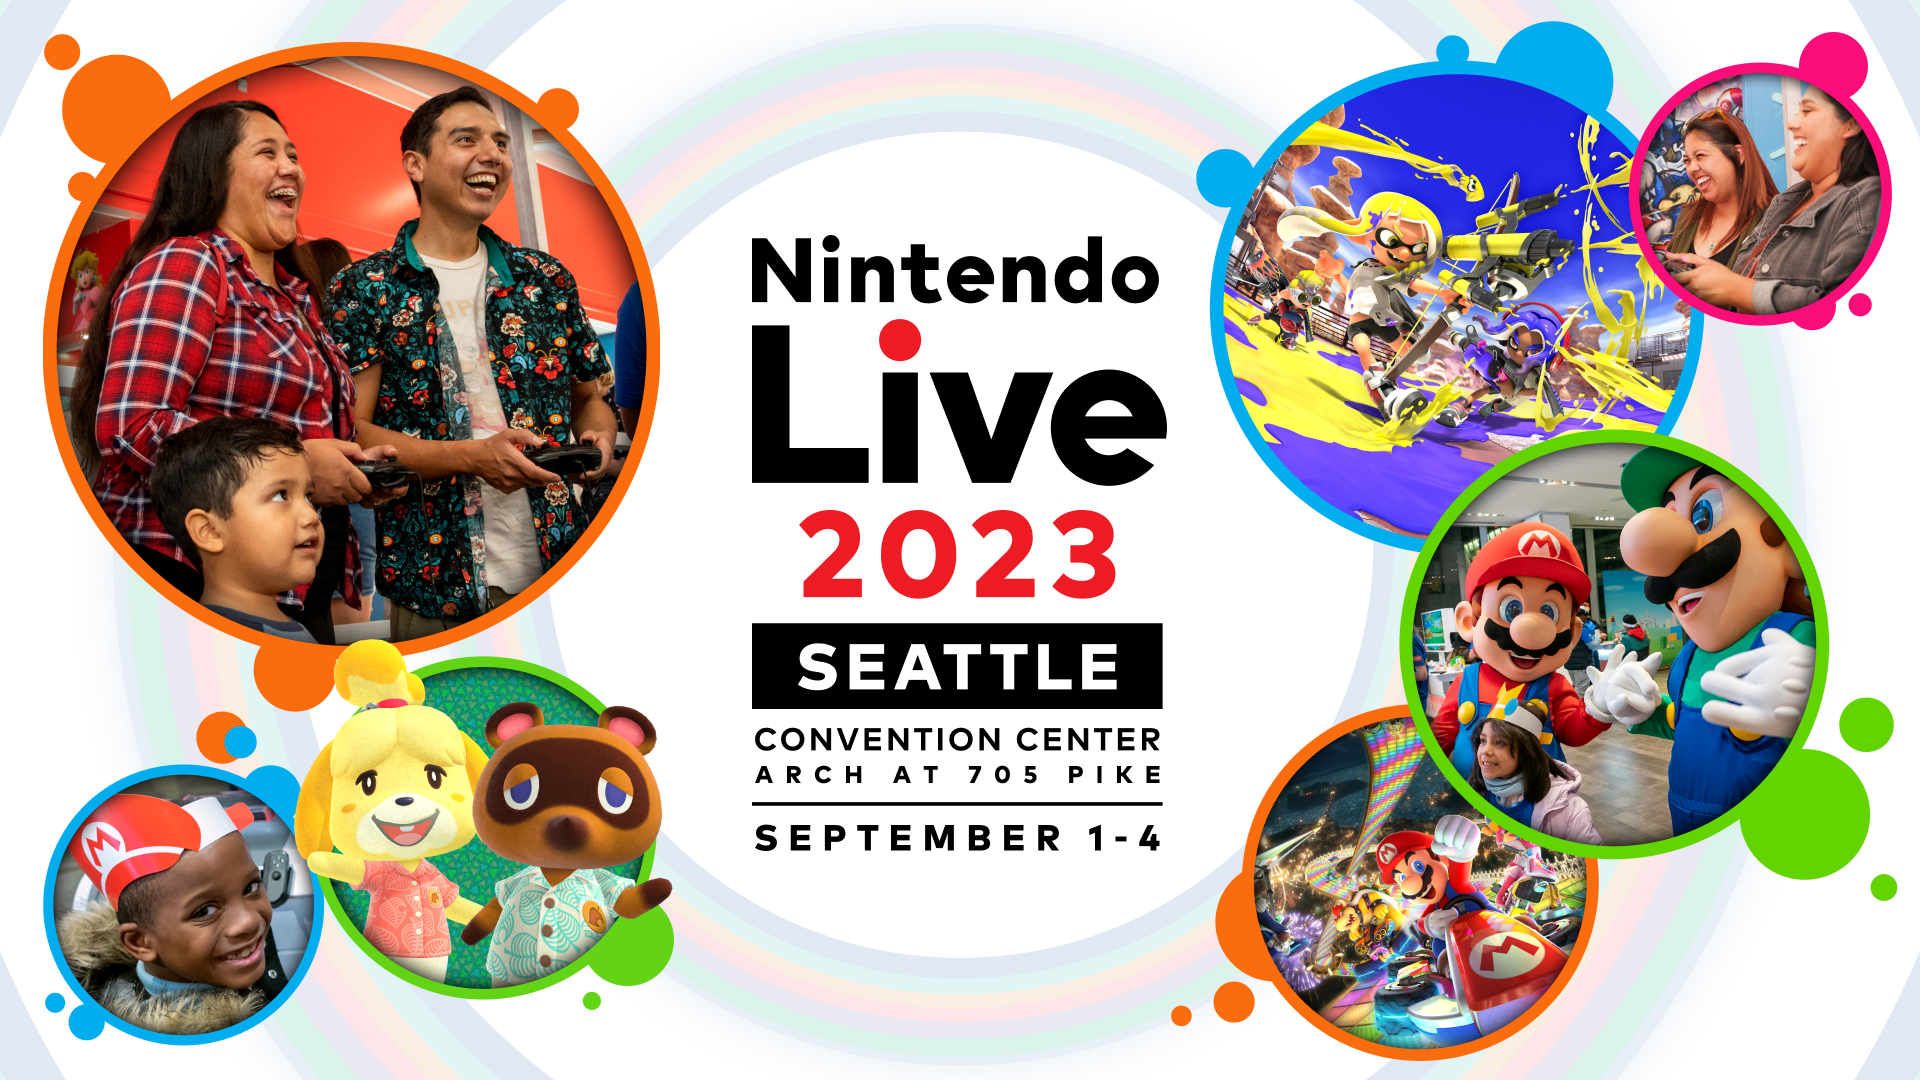 Nintendo Live 2023 Seattle Dates Set and People Can Win Tickets